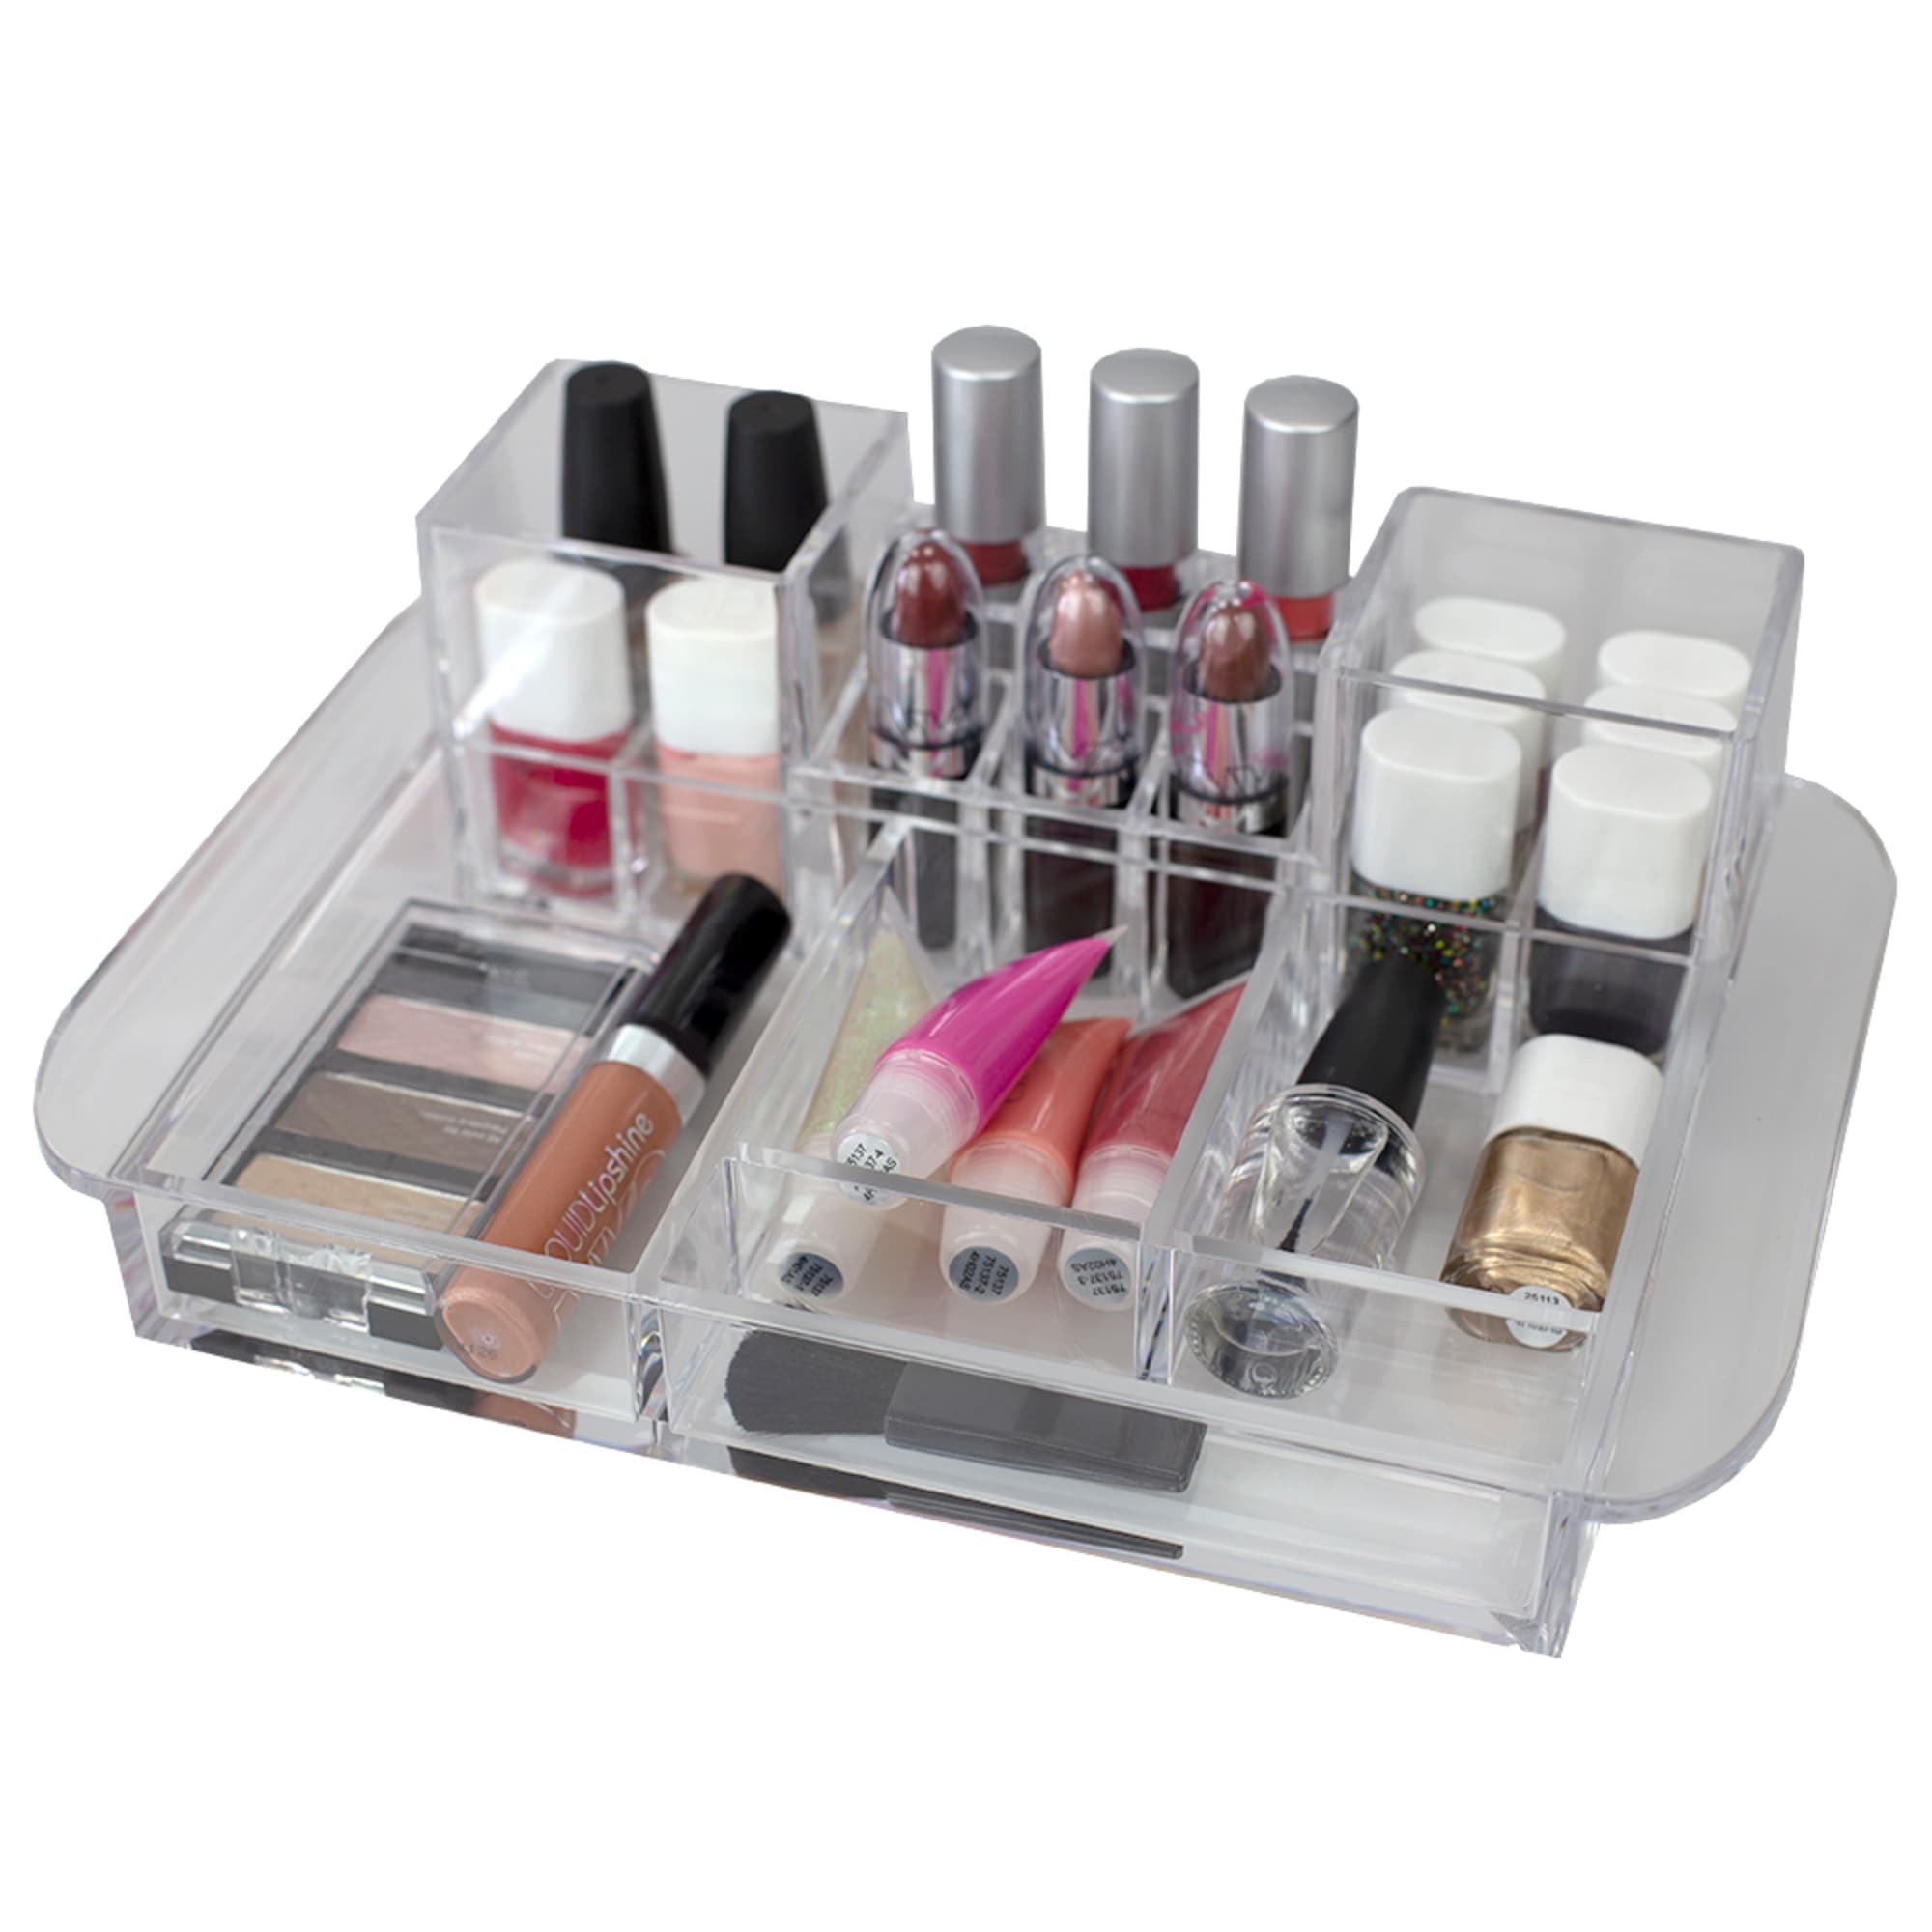 Home Basics Deluxe Large Capacity 16 Compartment Transparent Plastic Cosmetic Makeup and Jewelry Storage Organizer with Easy Grip Handles, Clear $6.00 EACH, CASE PACK OF 12